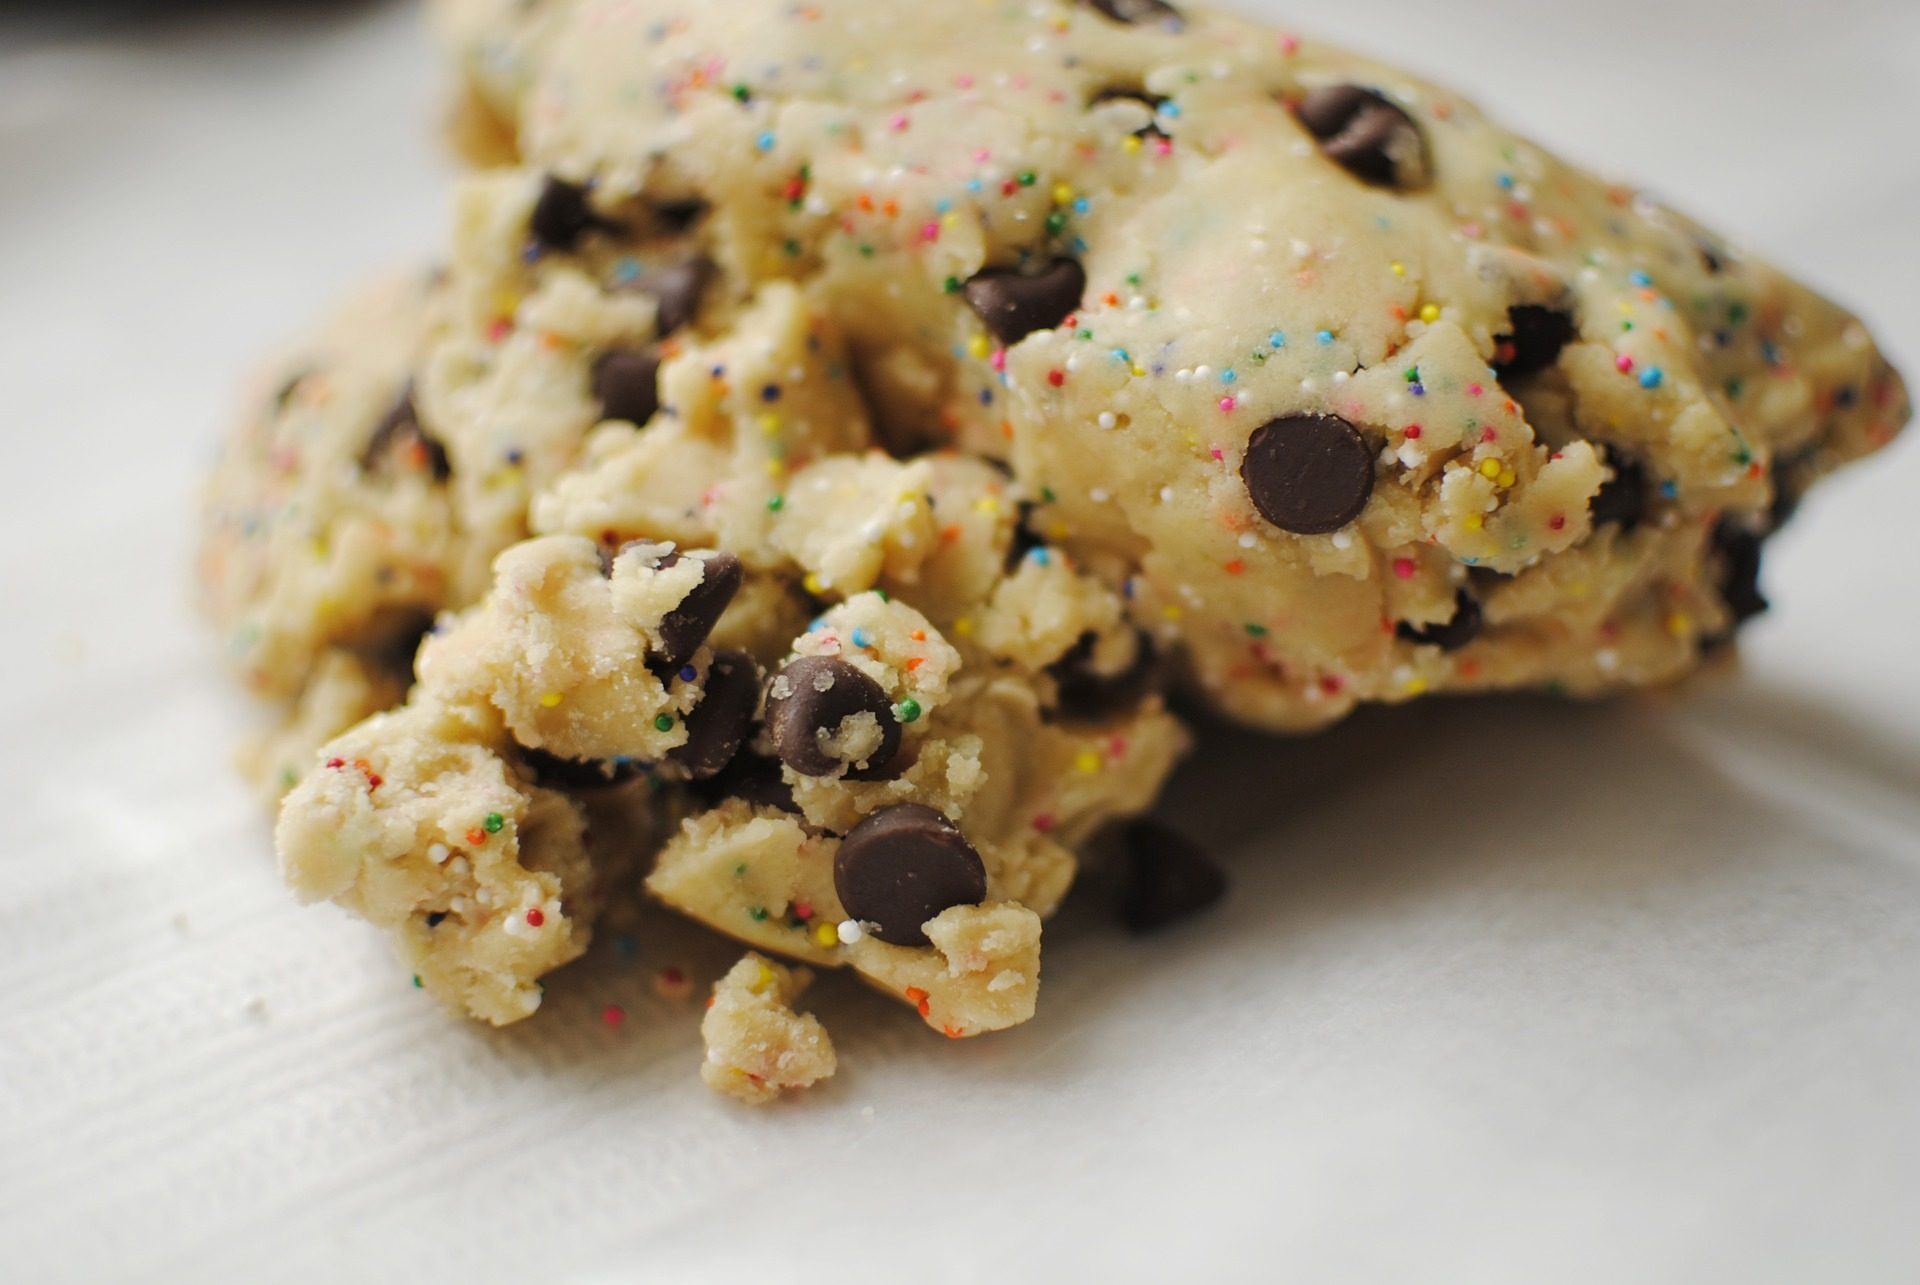 How To Make Healthy Edible Cookie Dough That’s Vegan, Paleo, and Gluten-Free